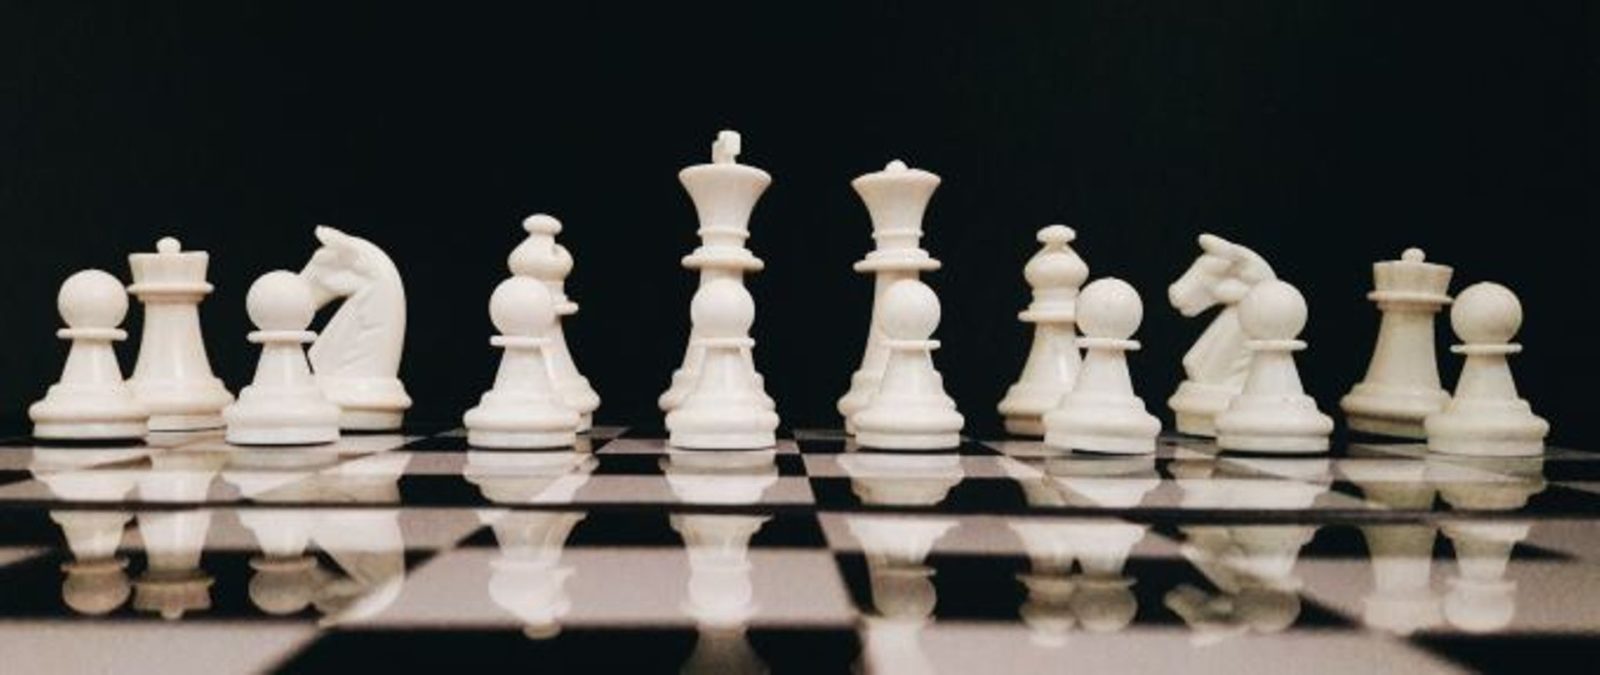 A glimpse on everything you must know about fantasy chess